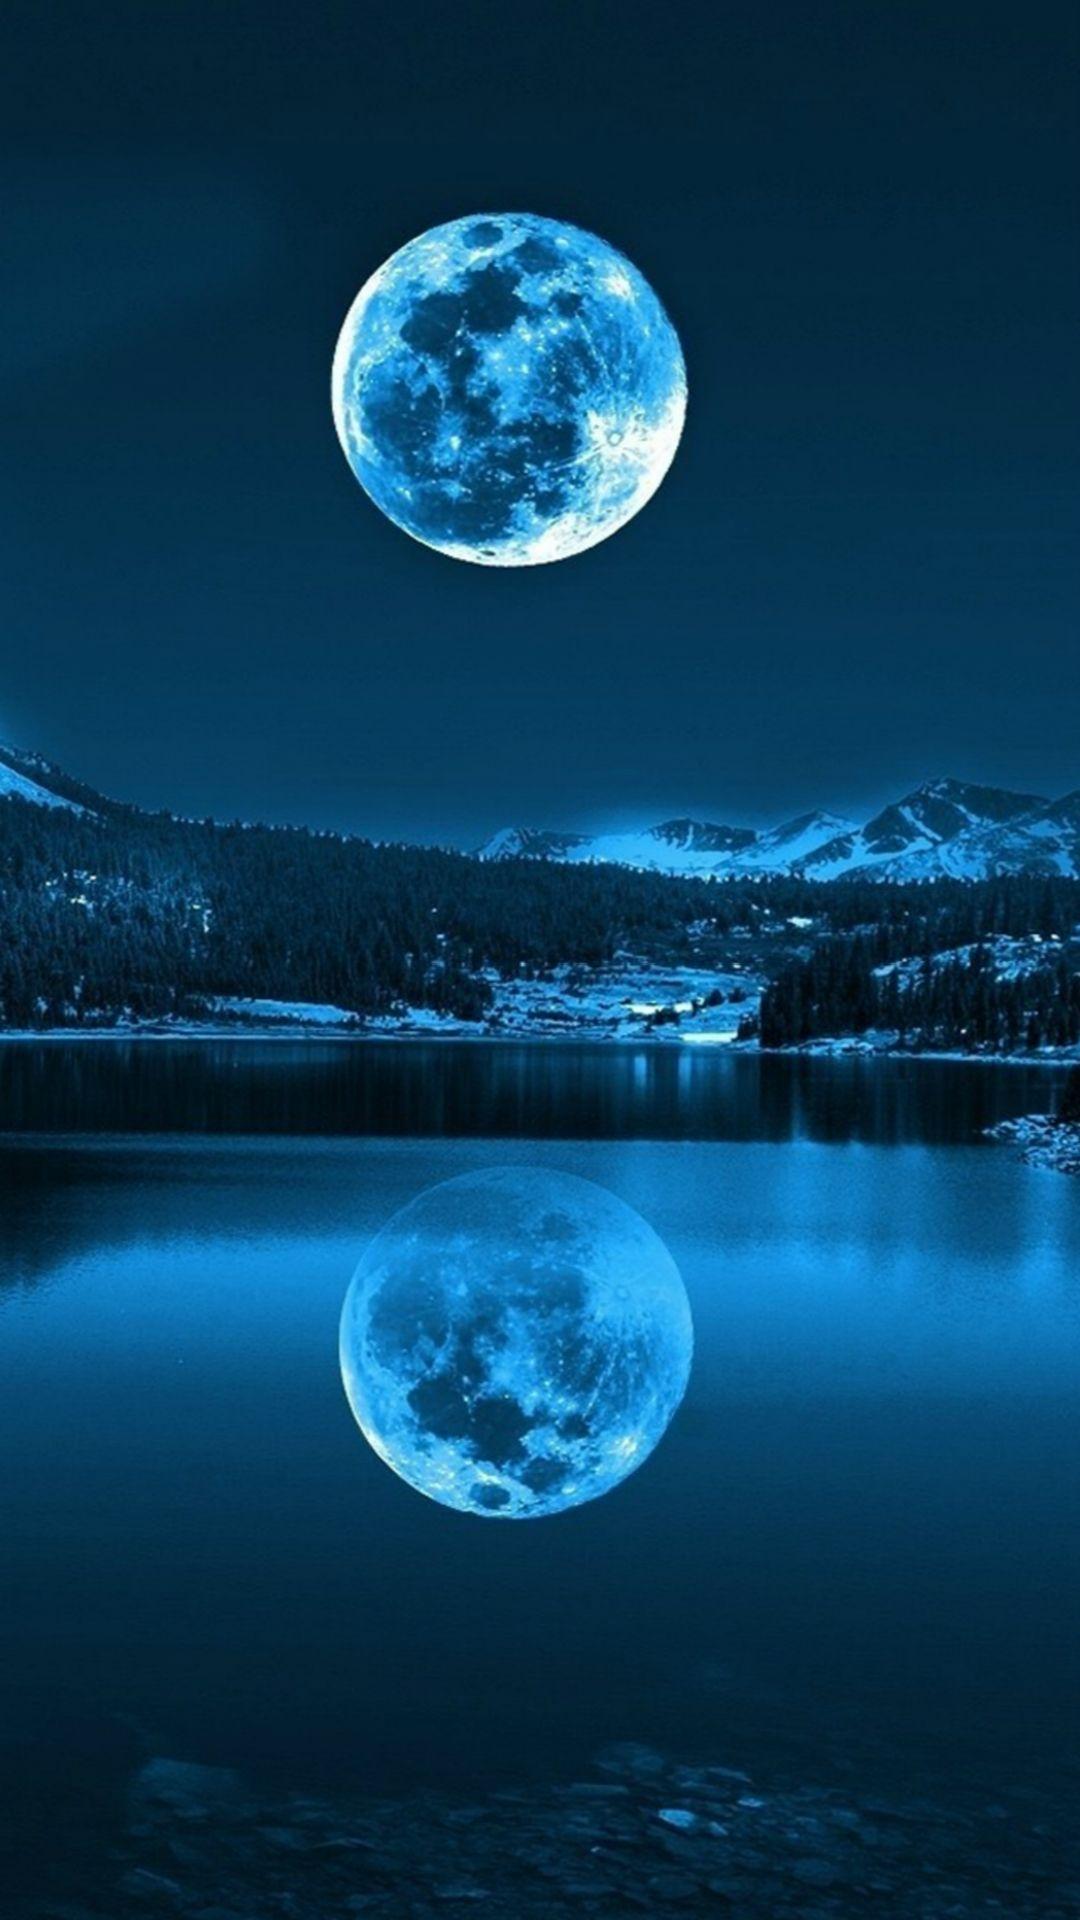 NATURAL IPHONE WALLPAPERS FOR THE NATURE LOVERS. Moon